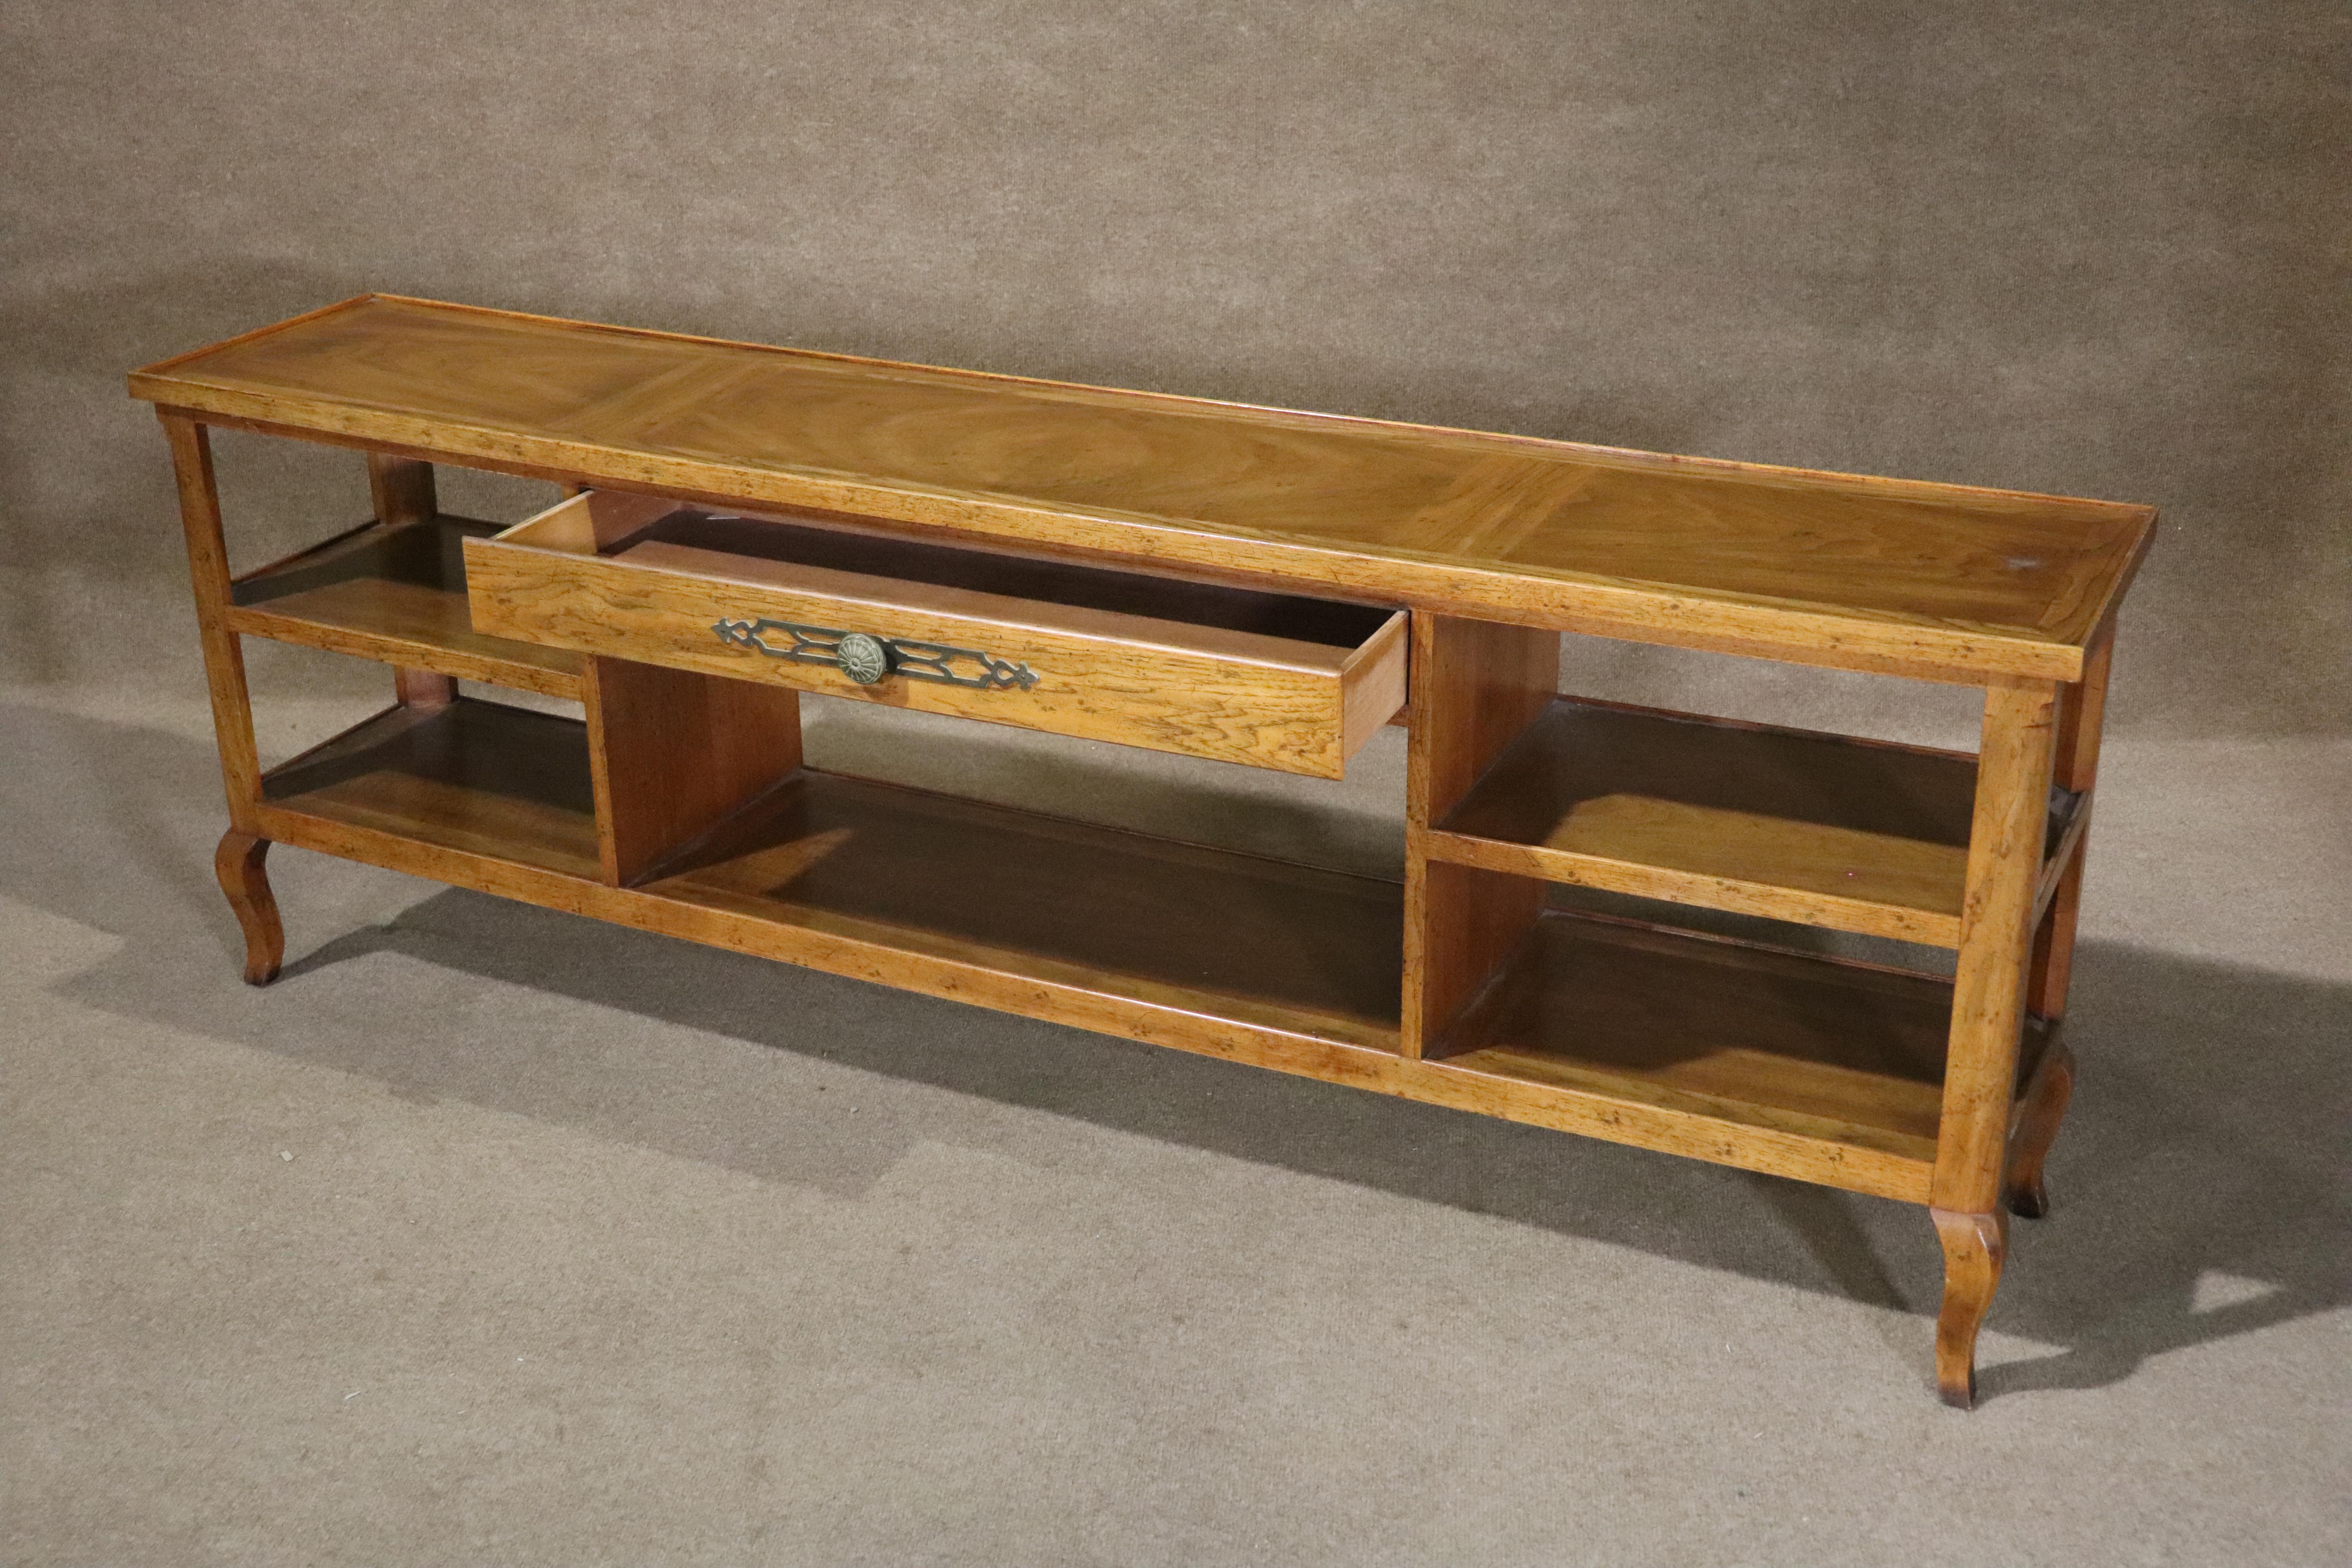 This six foot long table designed by Henredon features warm walnut top, open storage and a single drawer. Would make a great TV media table.
Please confirm location NY or NJ